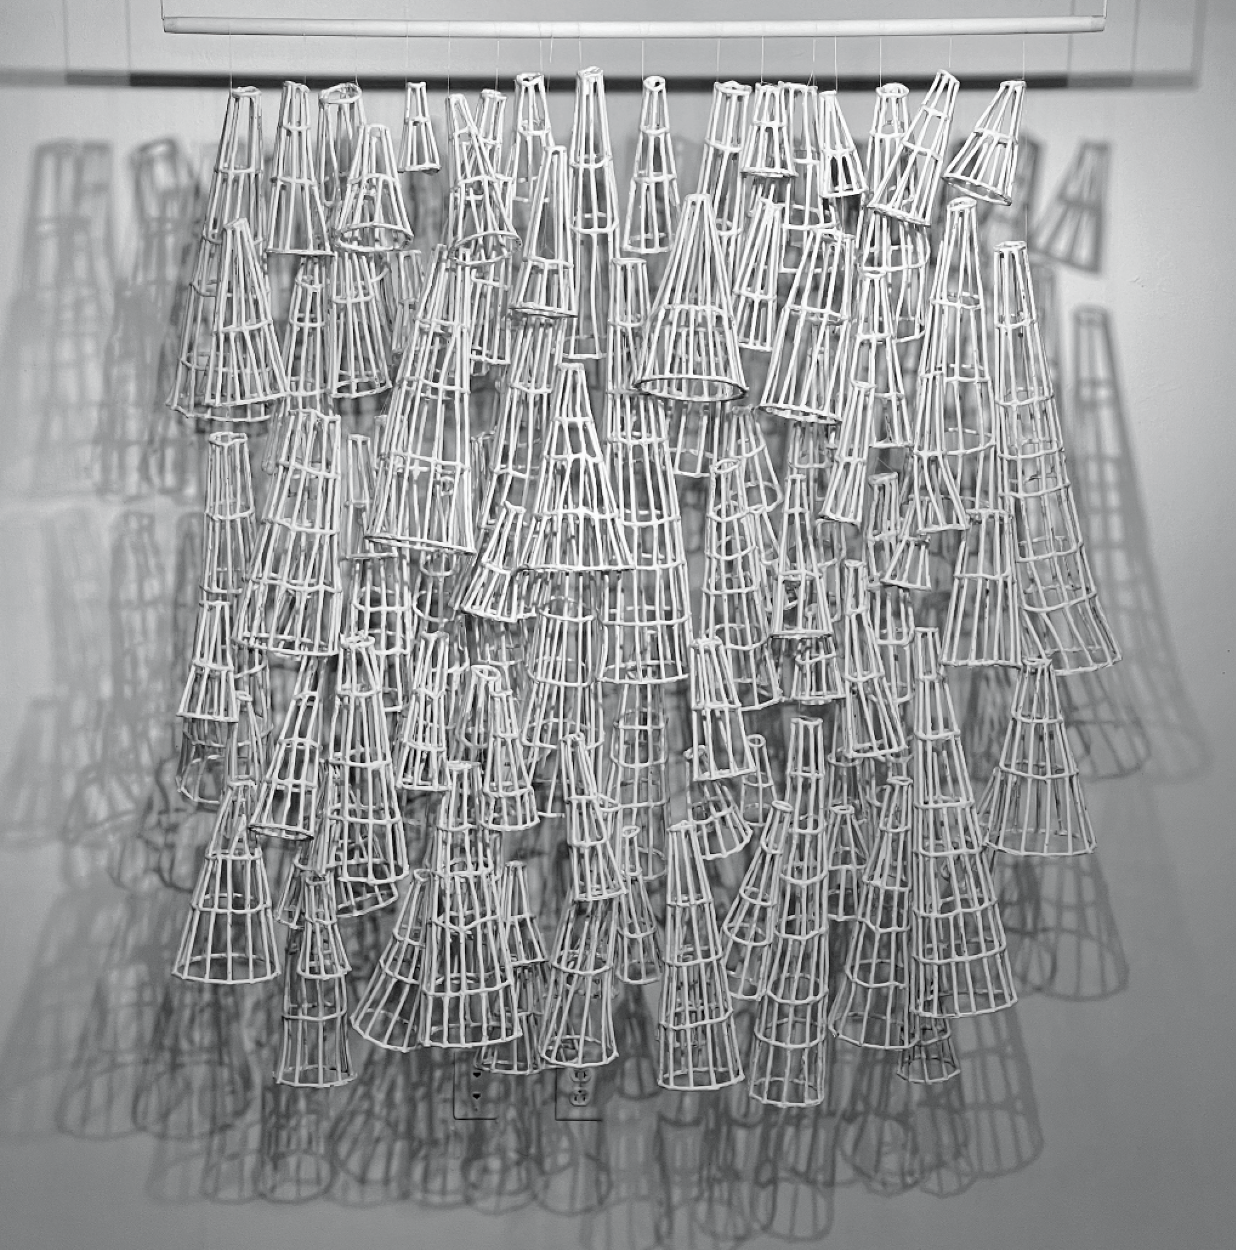 6 Tara Thacker’s Shadow Baskets (Winter) (overall), 7 ft. (2.1 m) in height, porcelain paper clay, fired to cone 6, 2021.